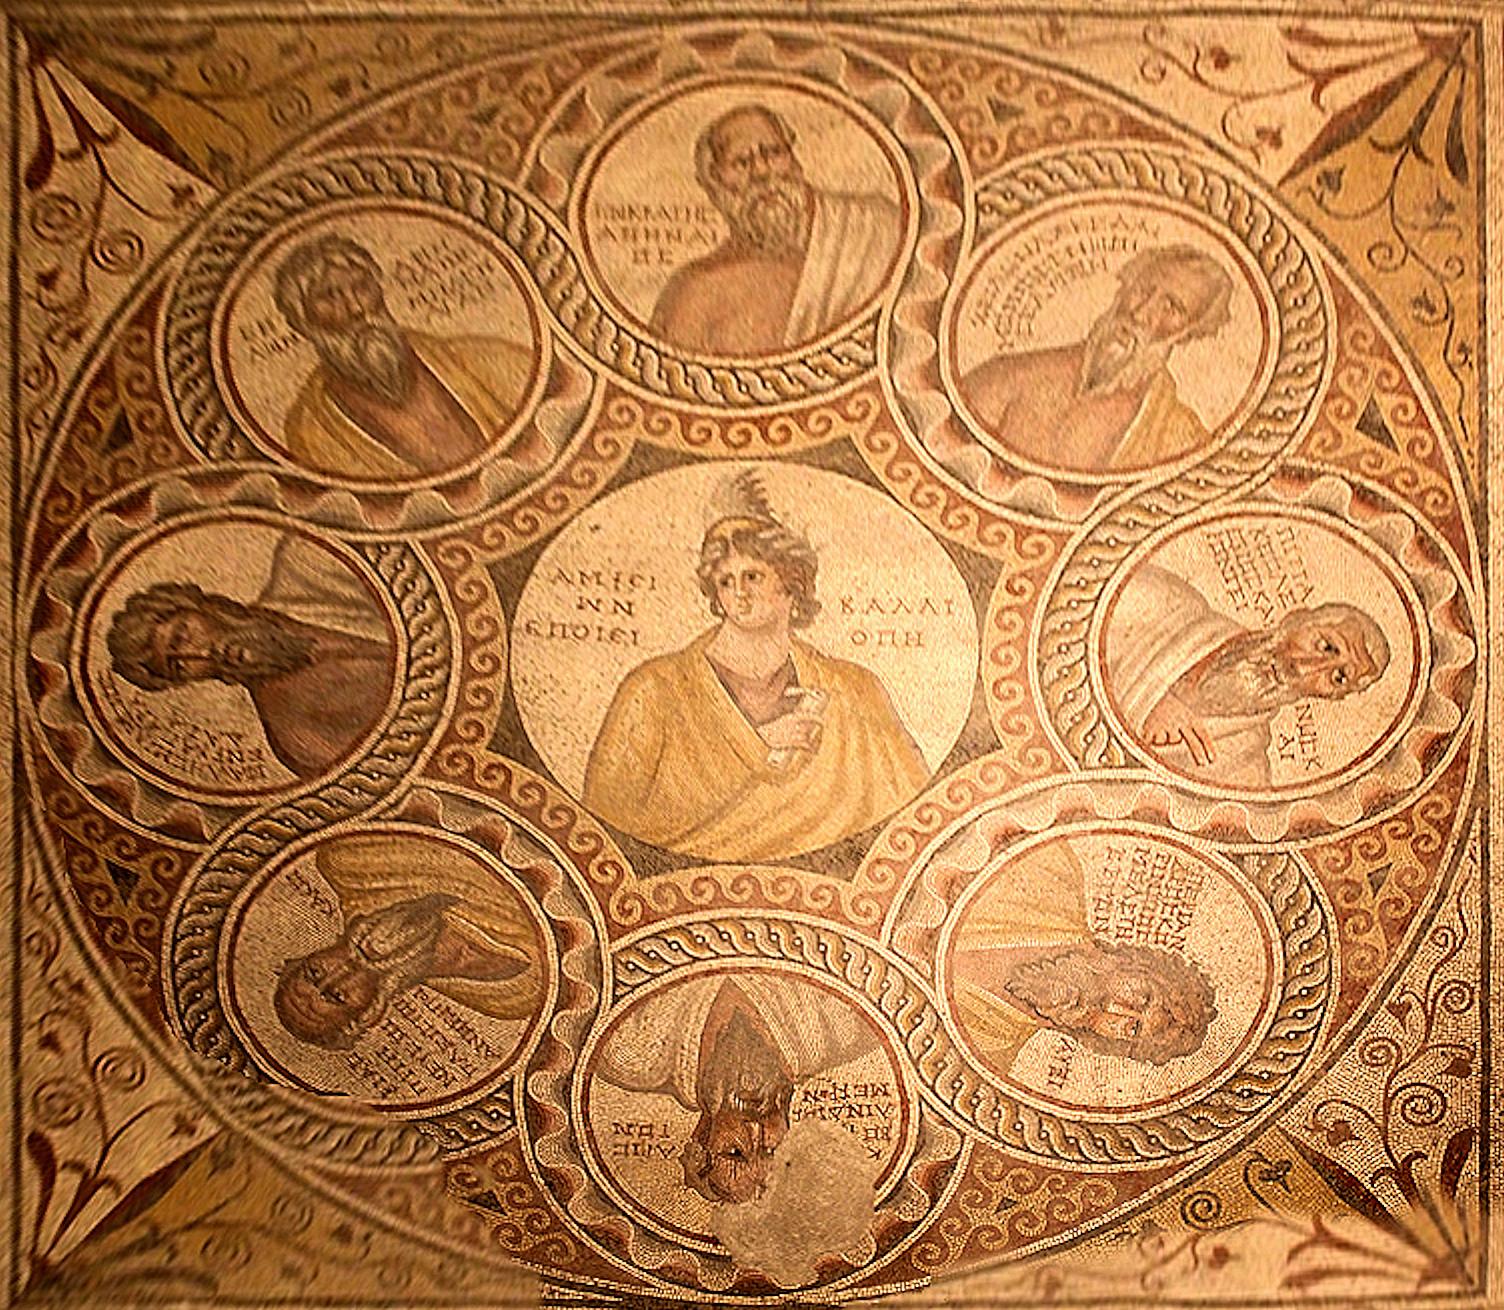 Represantation of the Seven Sages of Ancient Greece on mosaic